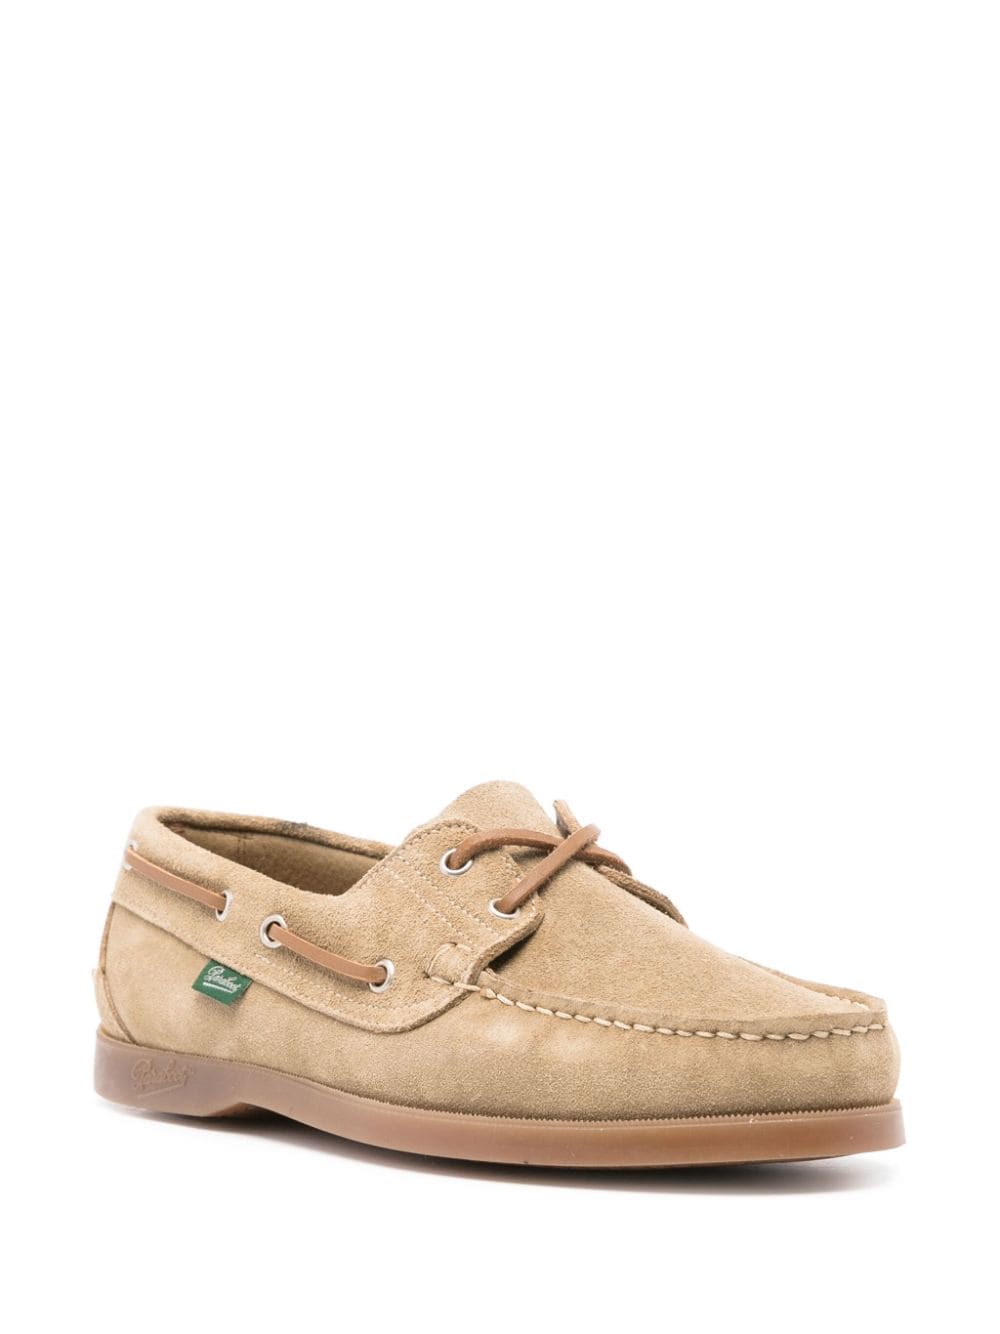 Paraboot PARABOOT- Barth Suede Leather Loafers